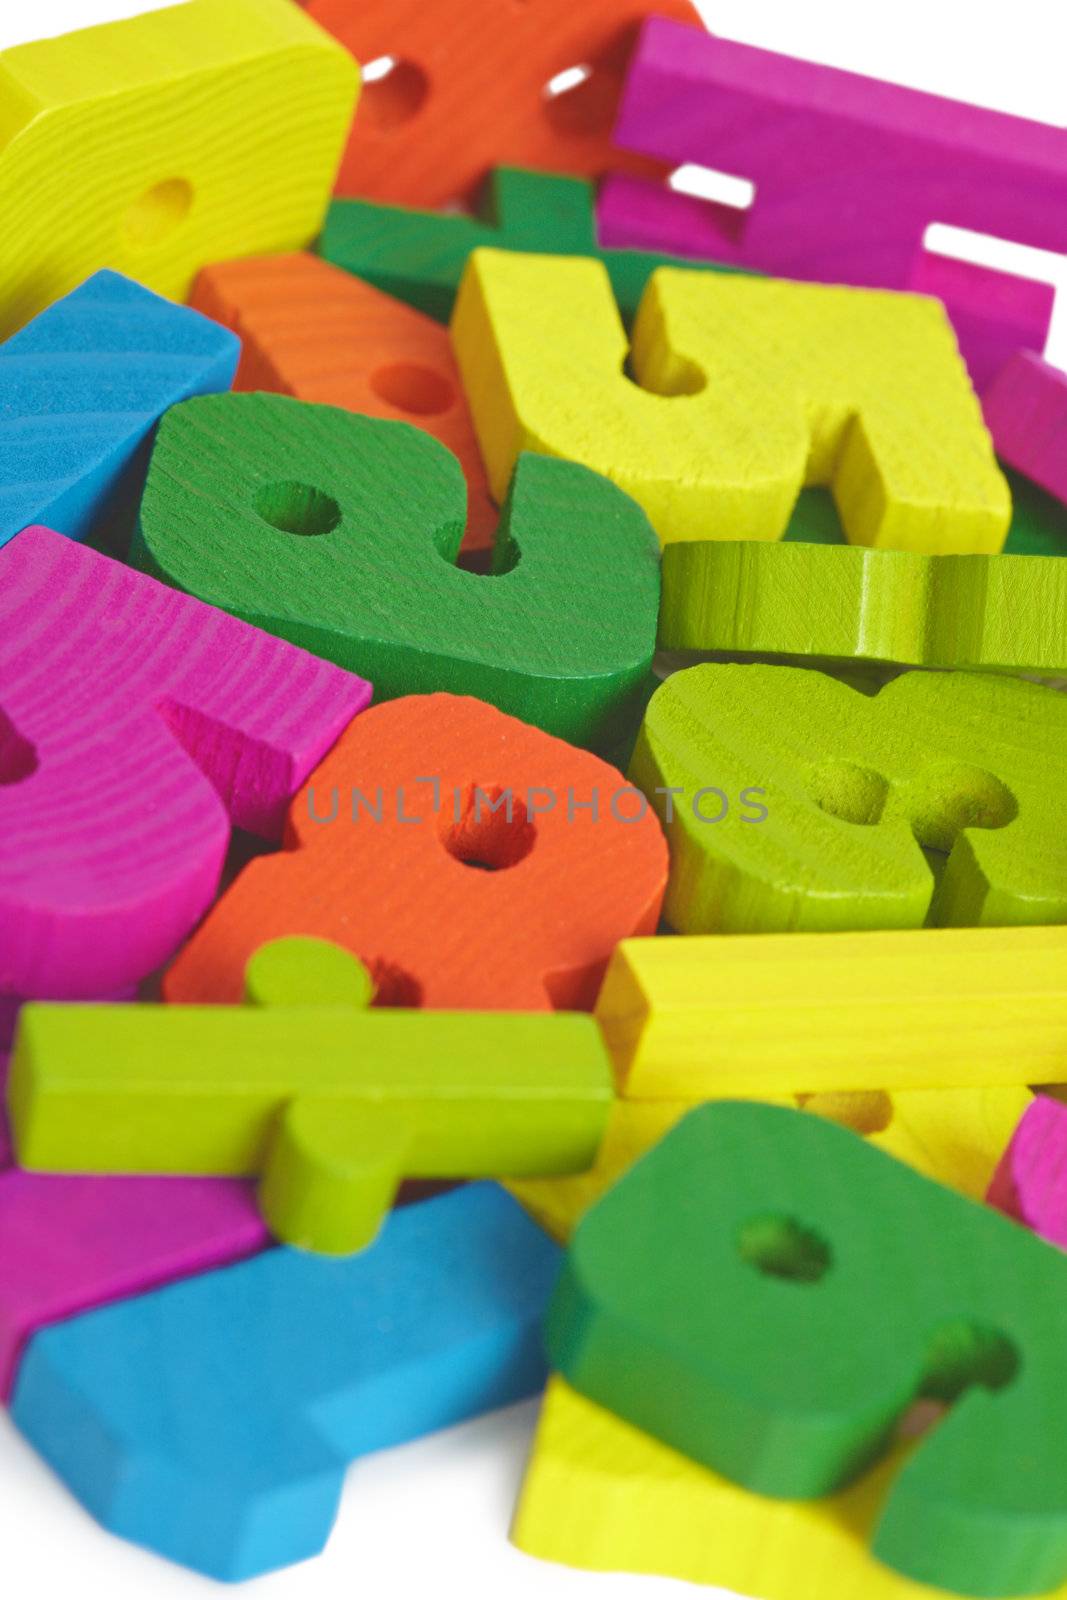 Child toy wooden letters by pzaxe